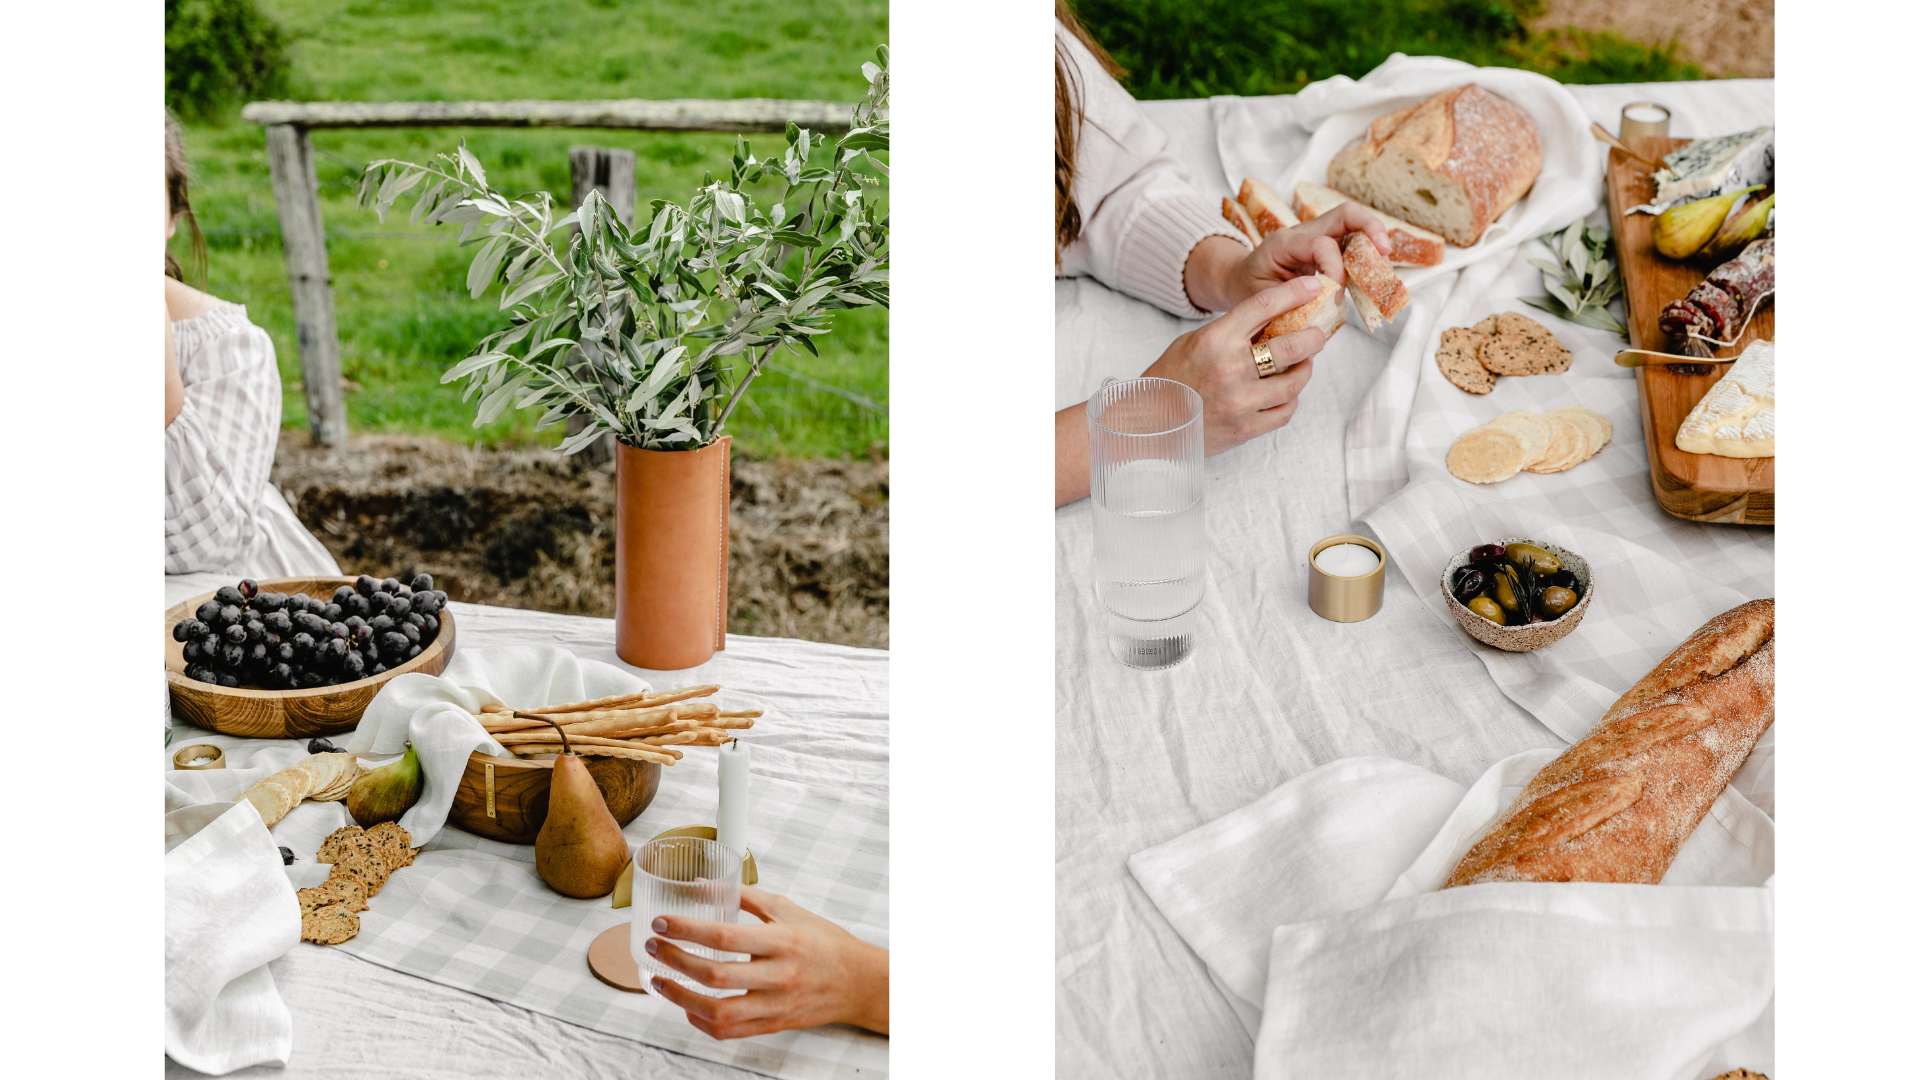 leather vase on outdoor entertaining grazing table